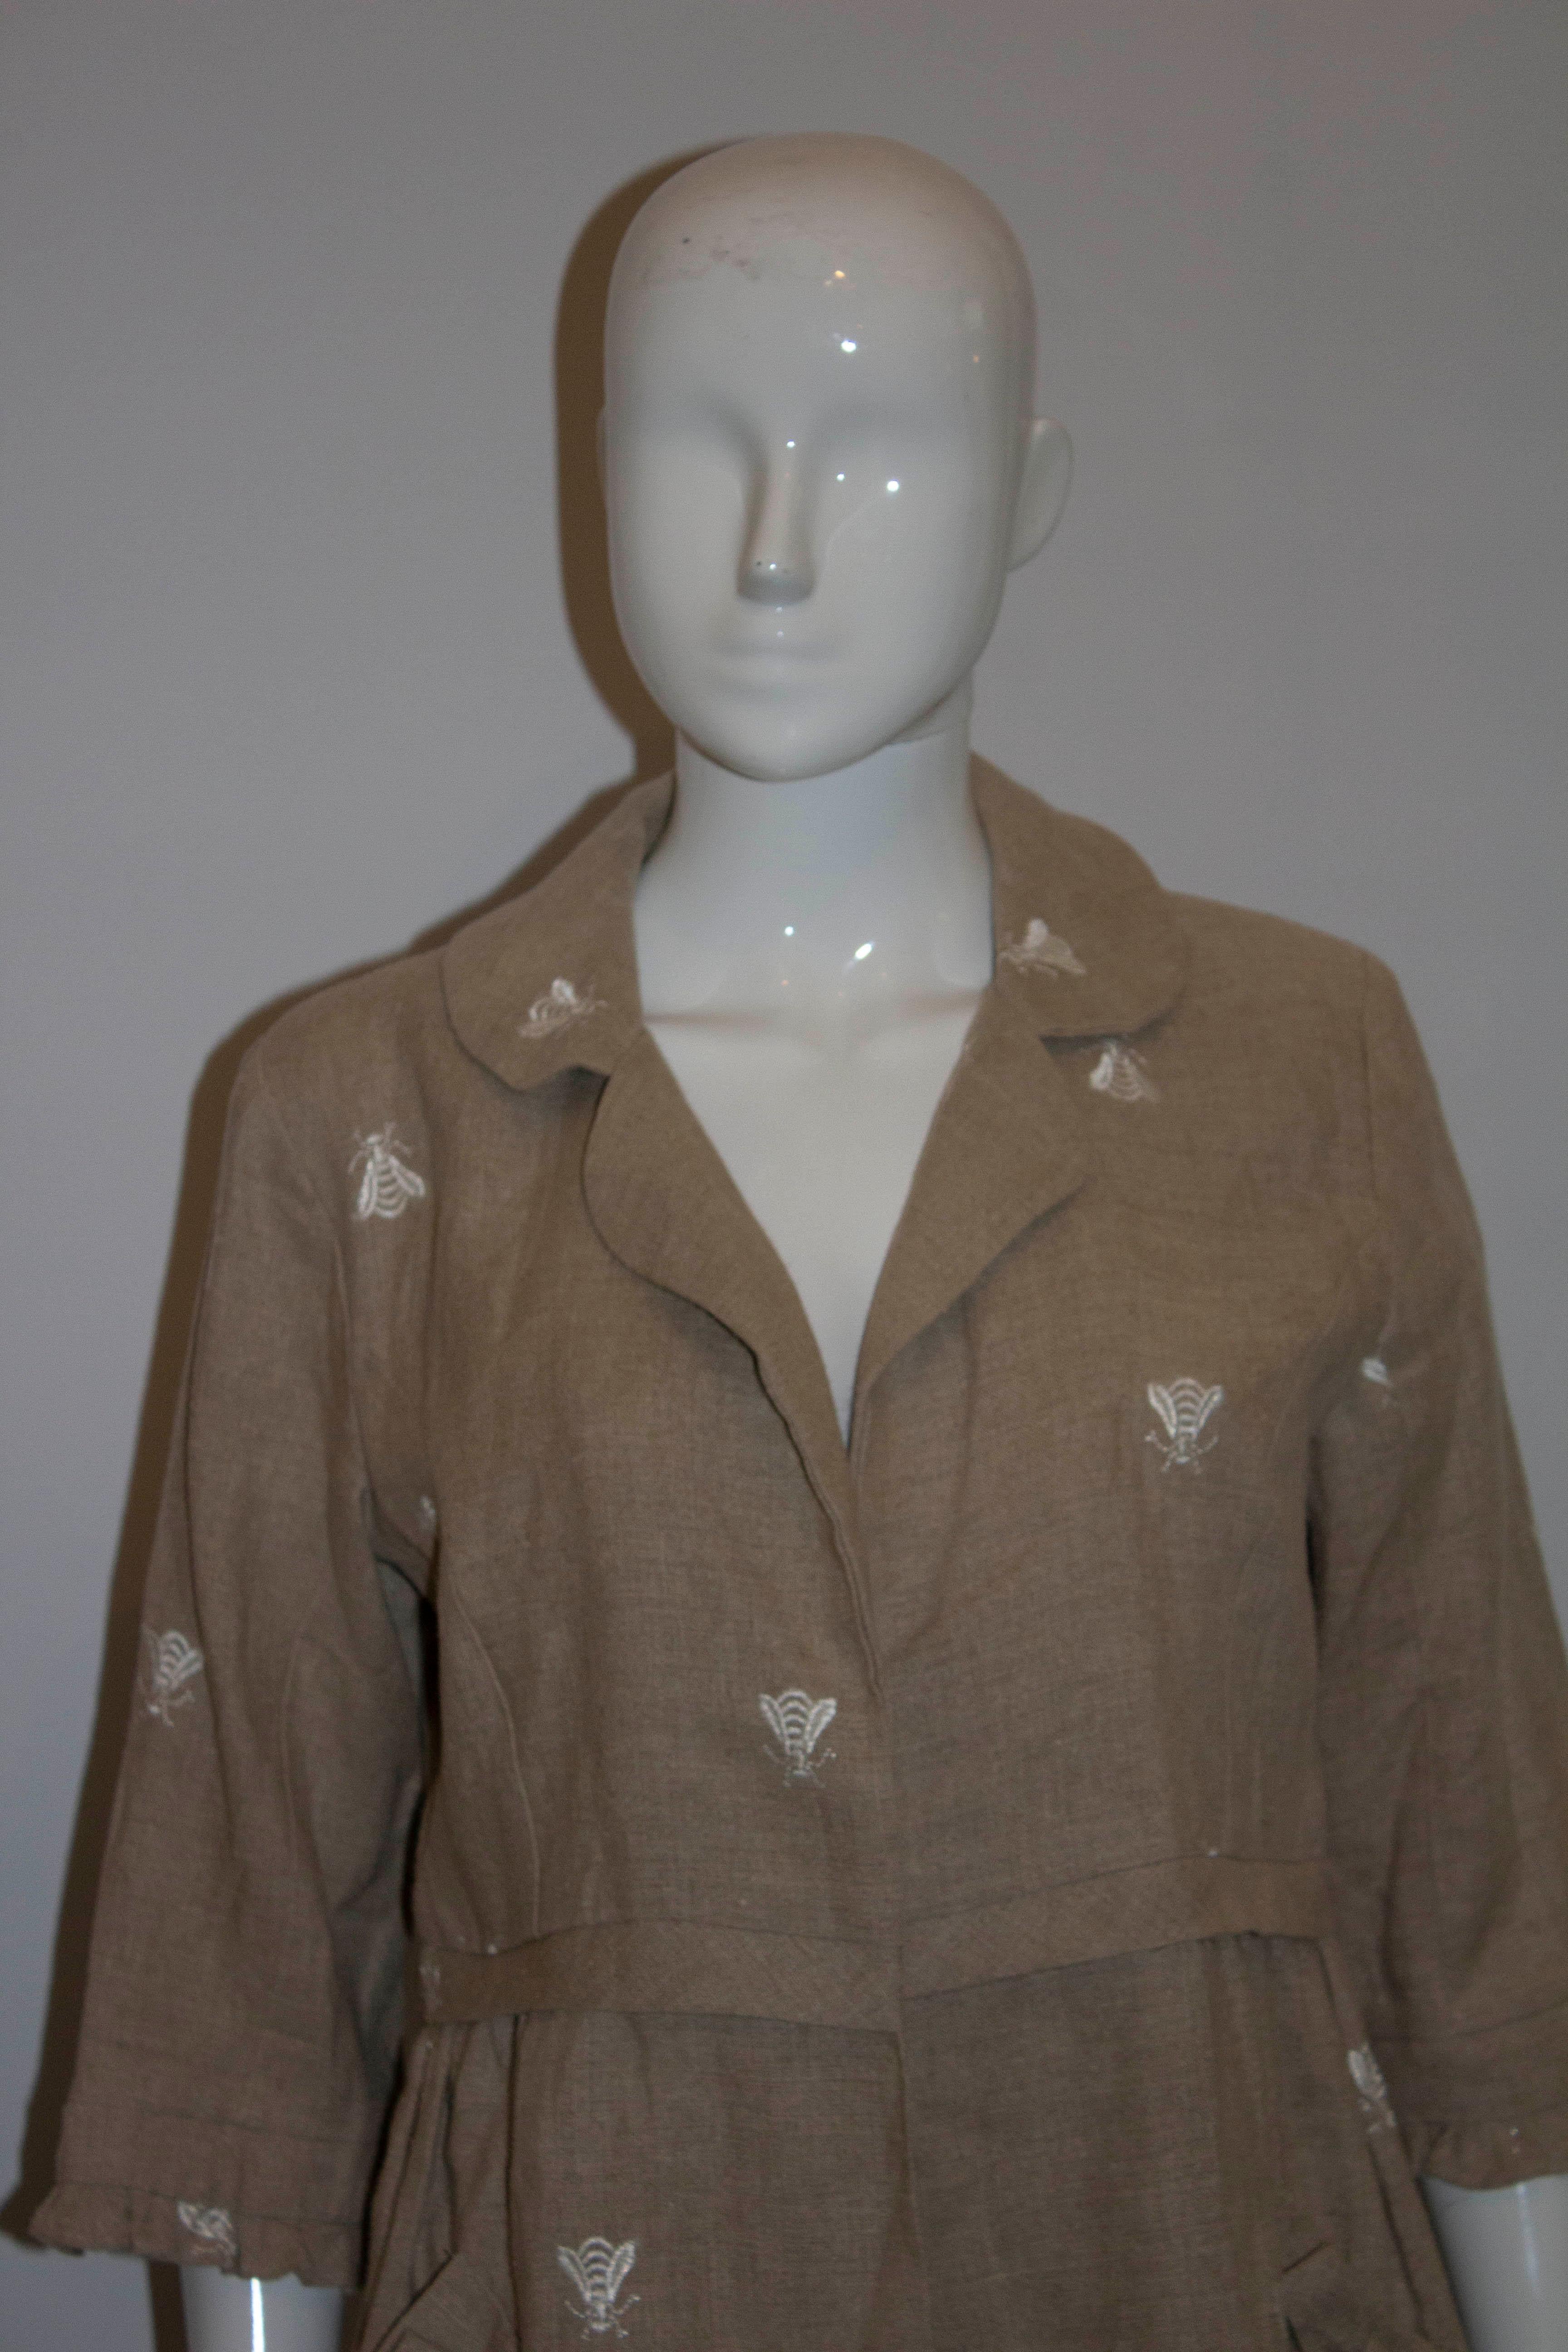 A pretty linen coat  in an attractive biscuit colour. The coat has elbow length sleaves with frill detail , a pocket on either side , gathering at the waist  and a cut away collar. It has white embroidery detail of insects.

Measurements: Bust up to